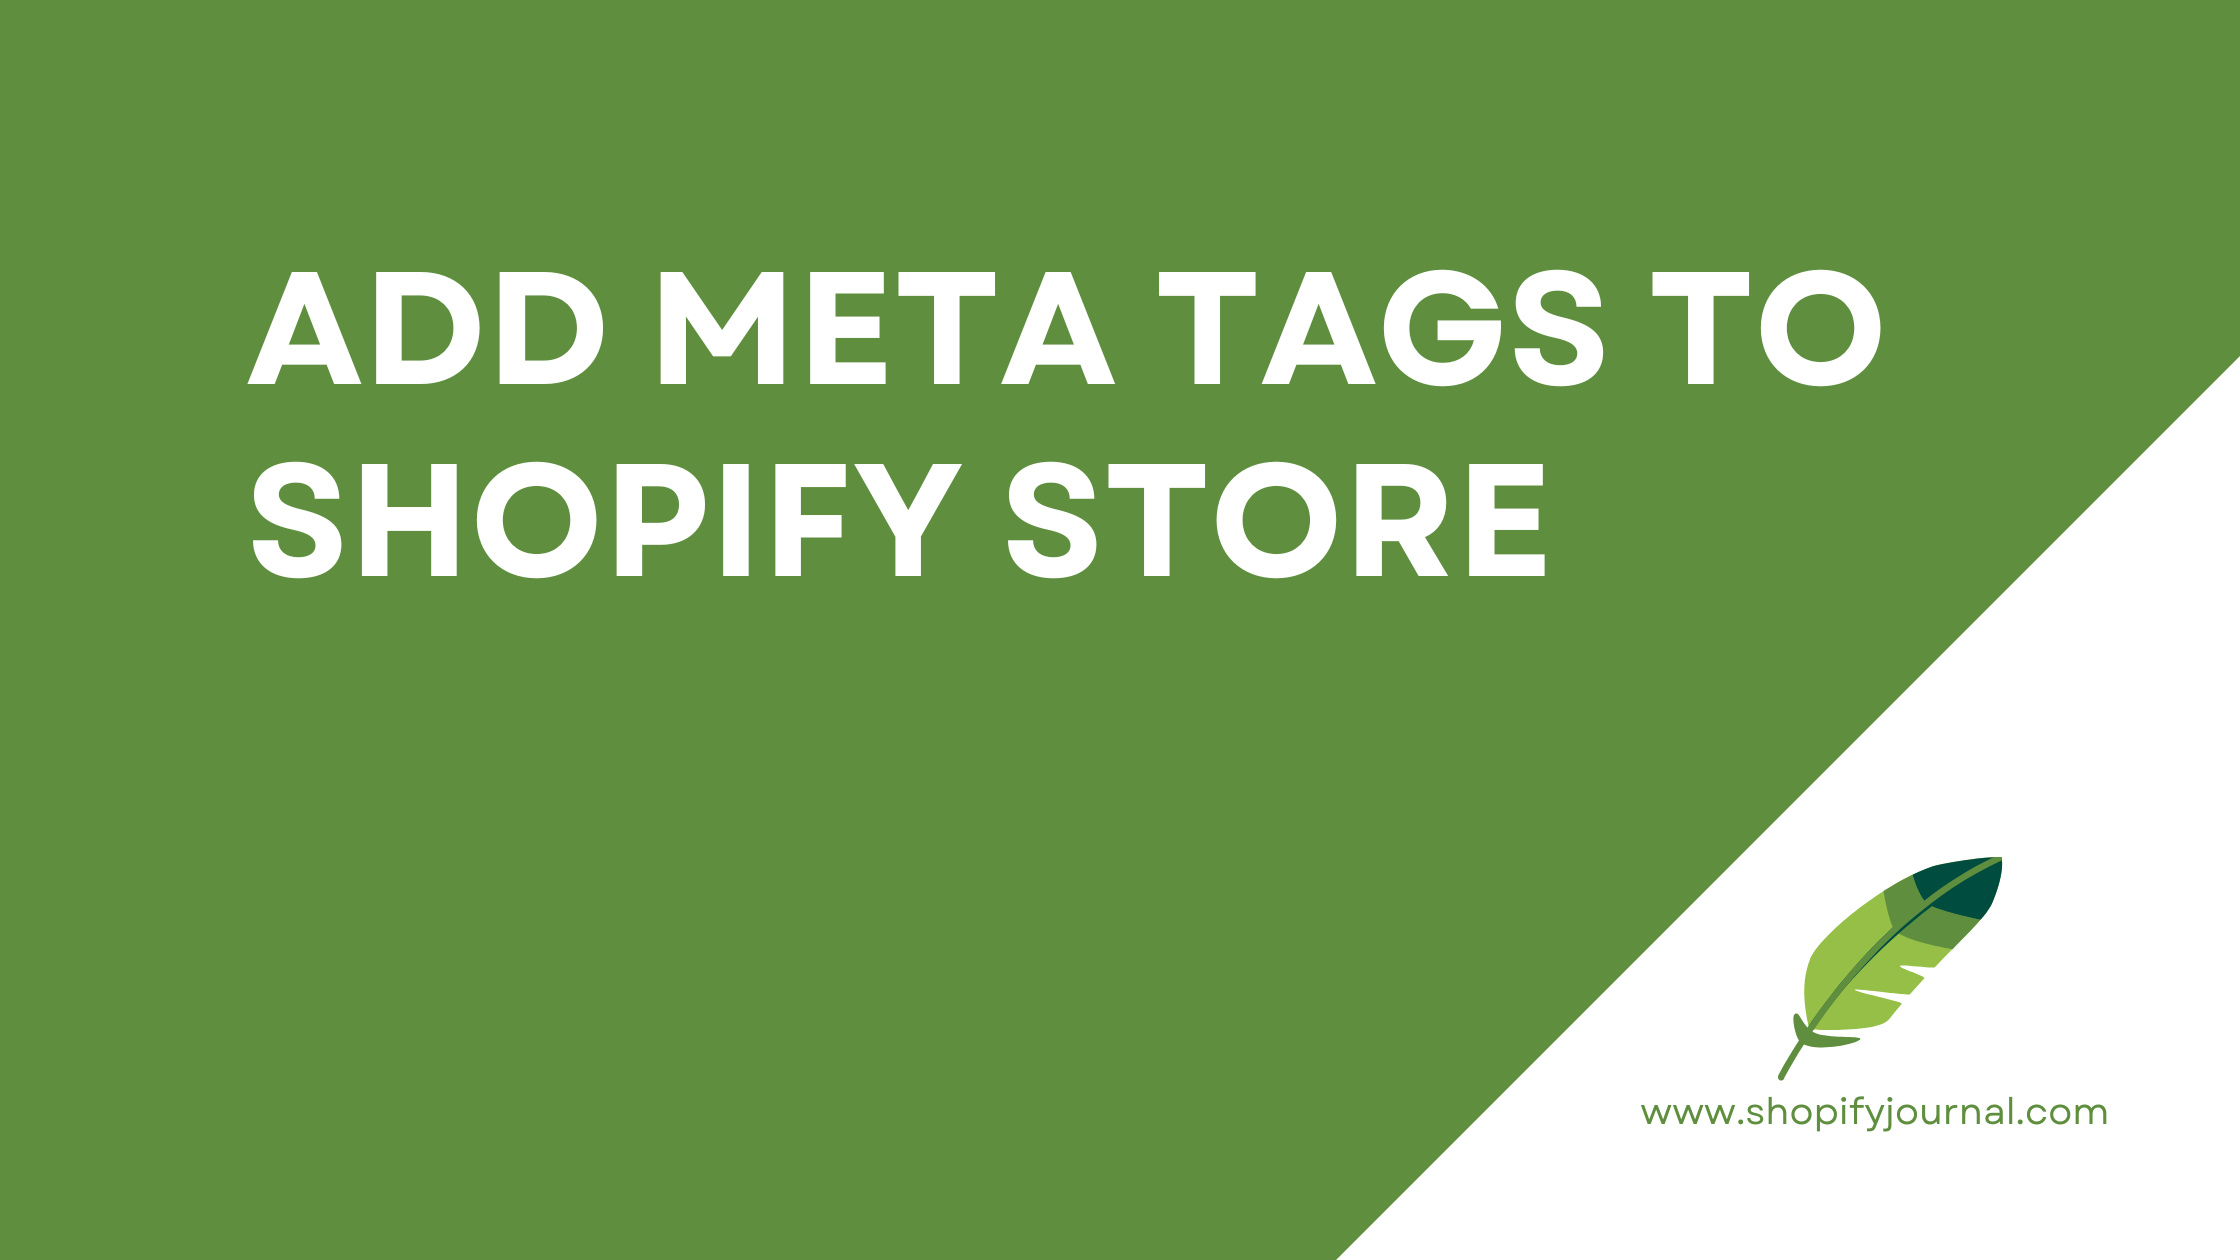 How to Add Meta Tags to Shopify Store